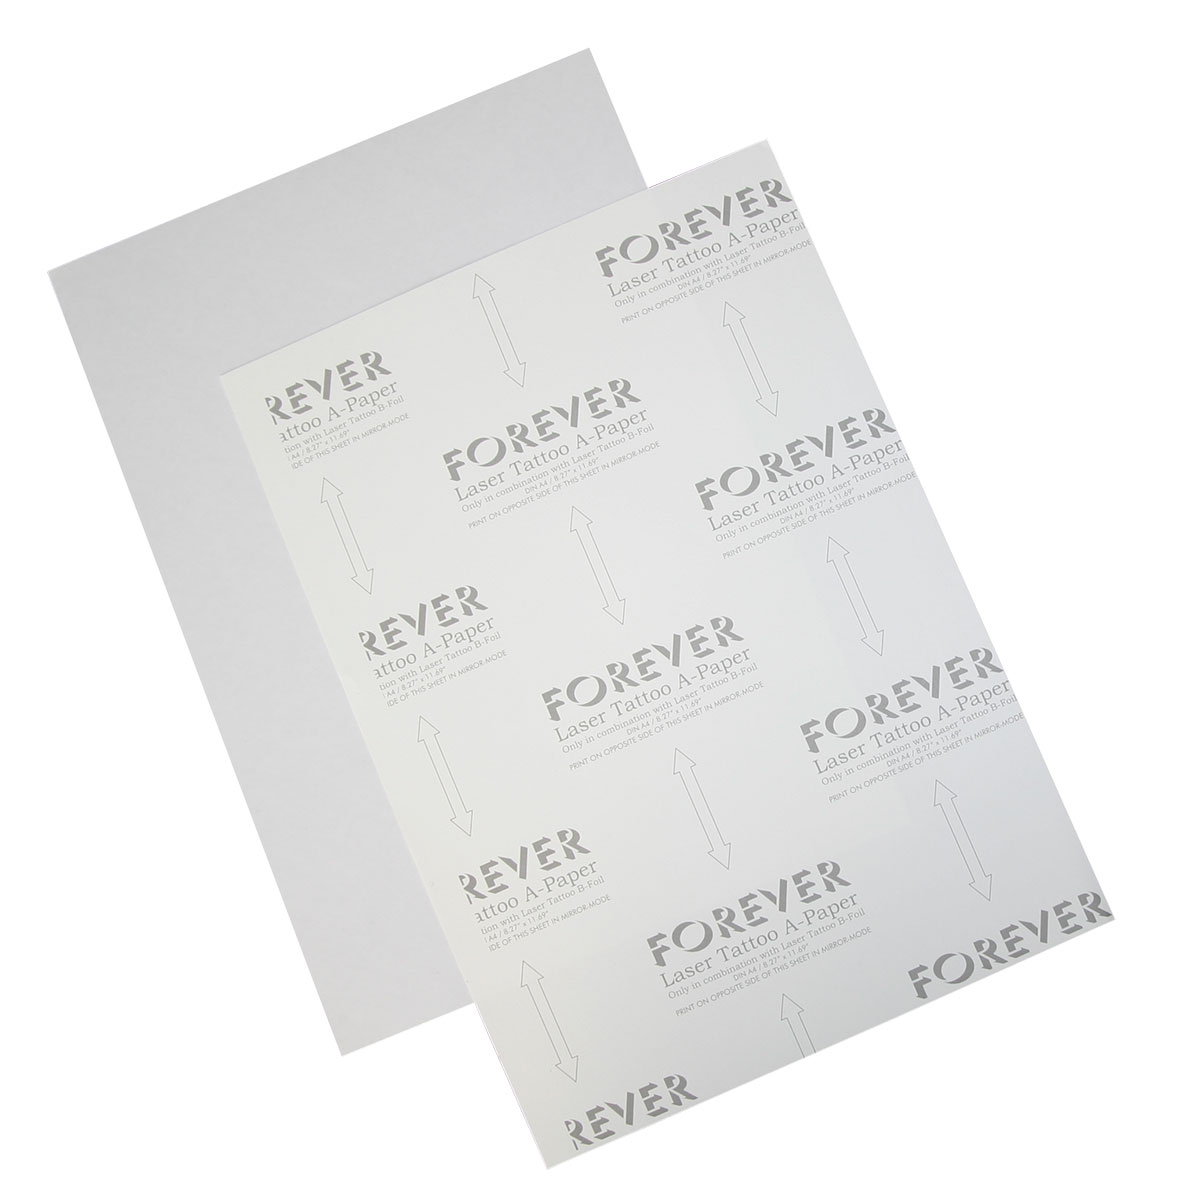 Removable tattoo paper for laser printers Brand: FOREVER A4 Quantity in package: 10